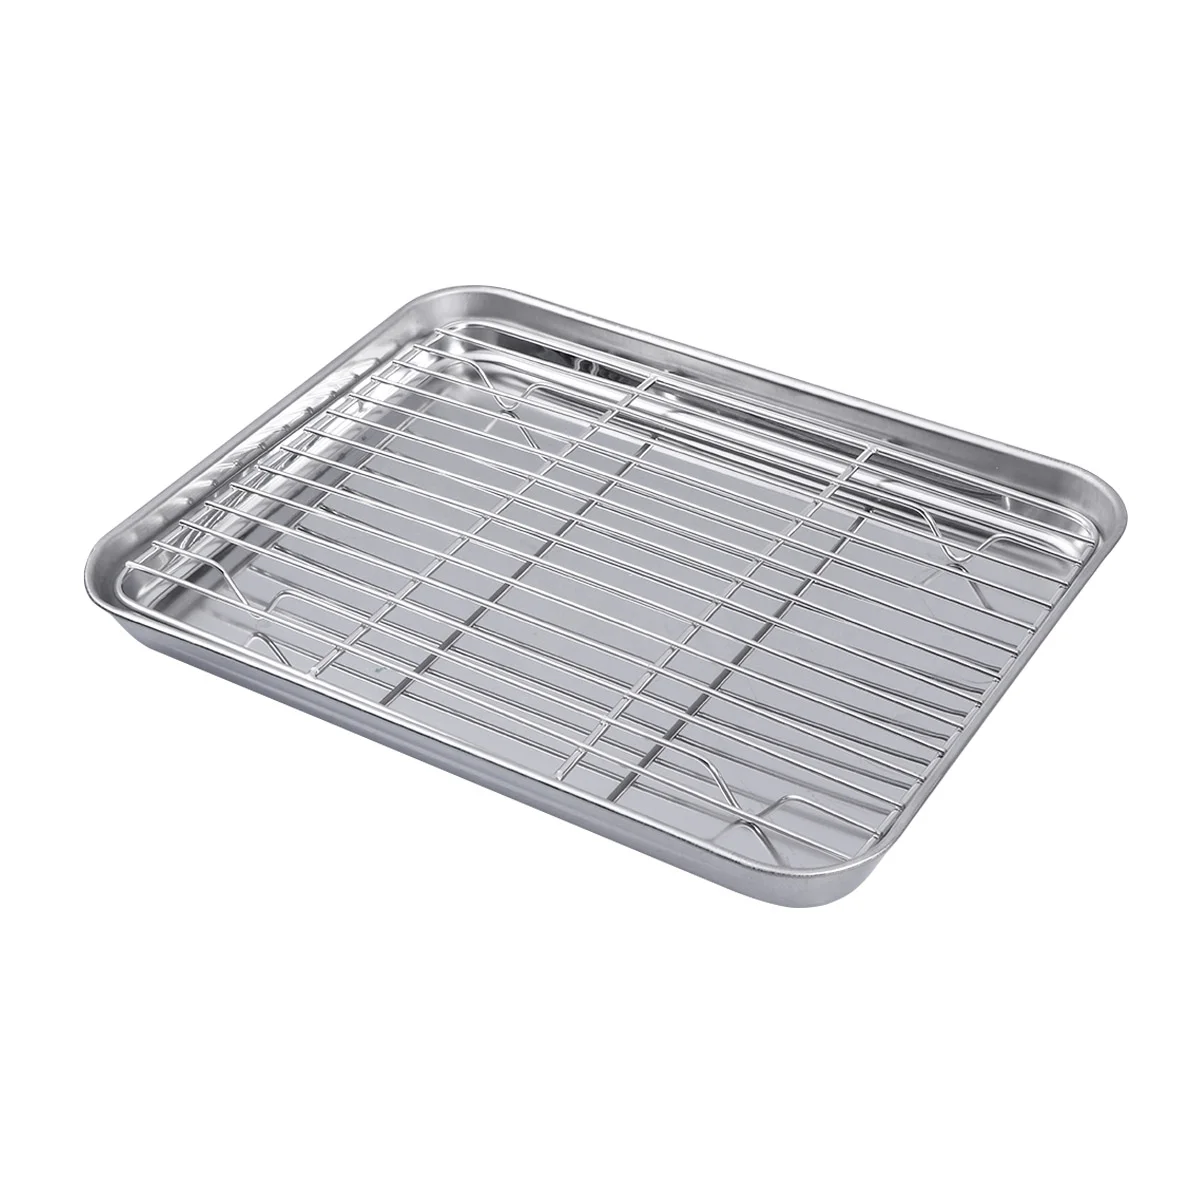 

2 Pieces/Set Rectangular Baking Tray Stainless Steel Baking Pan Sheet with Removable Cooling Rack - 26x20x25cm